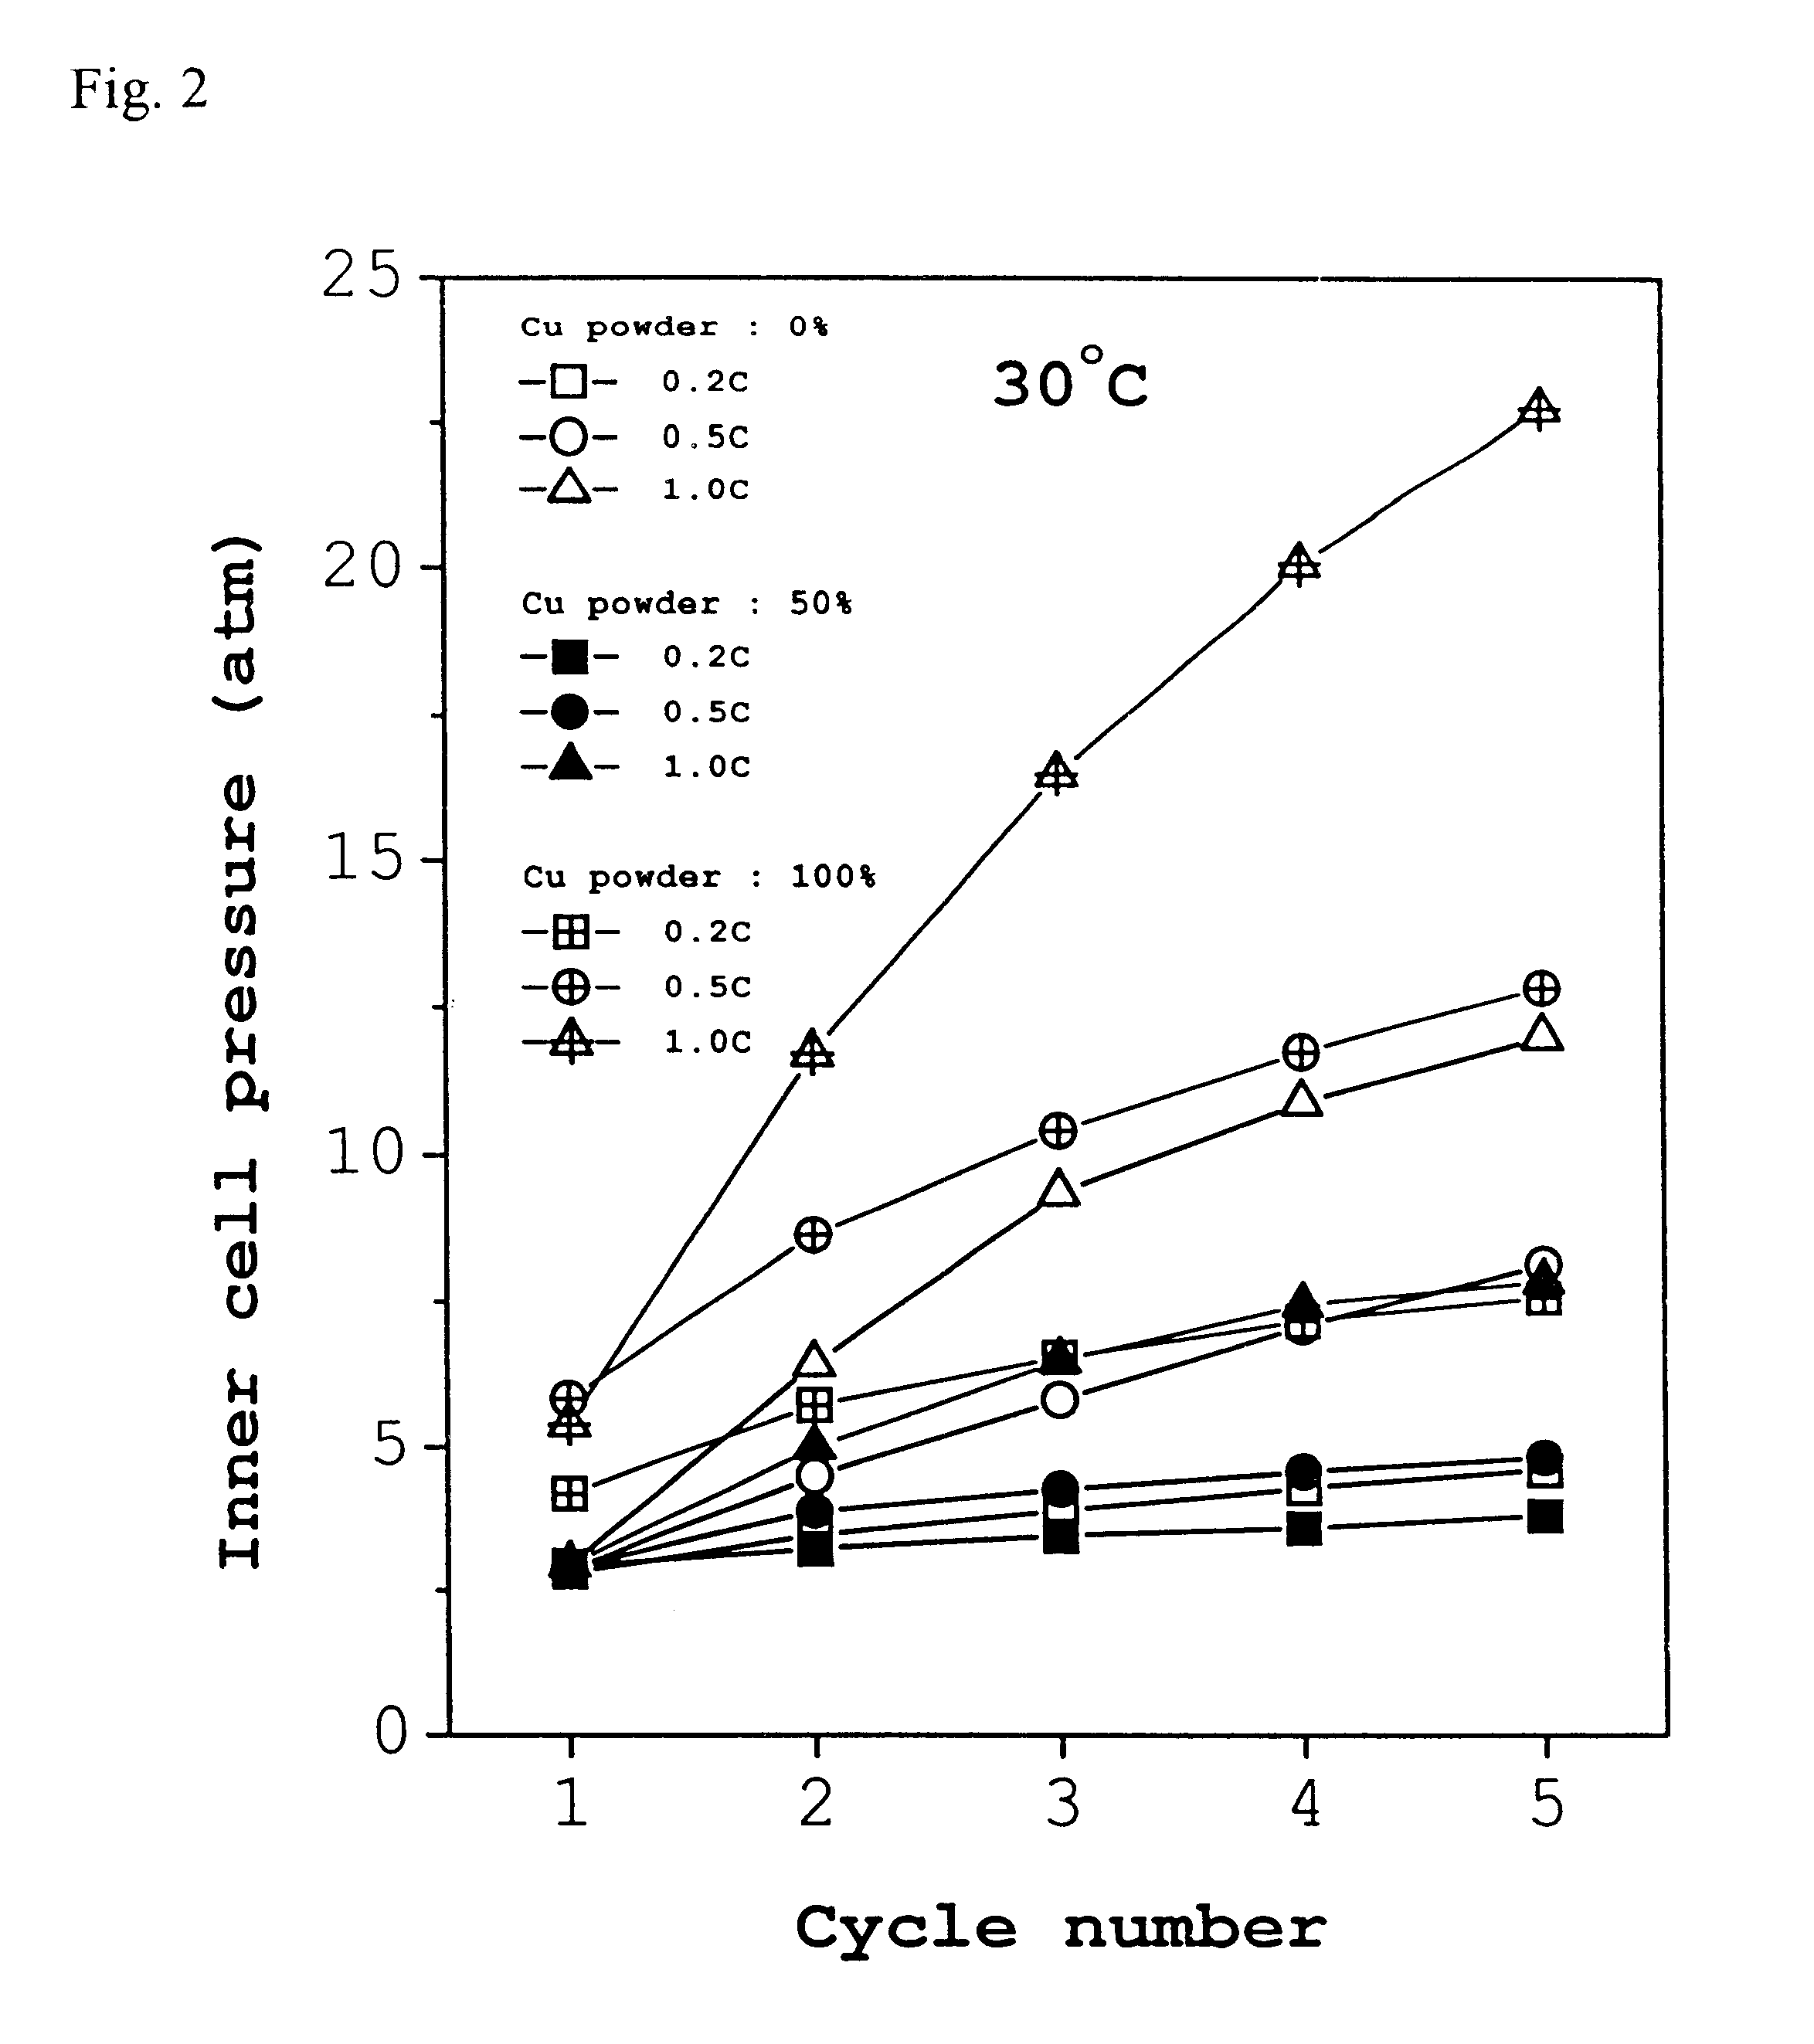 Method for preparing electrodes for Ni/Metal hydride secondary cells using Cu